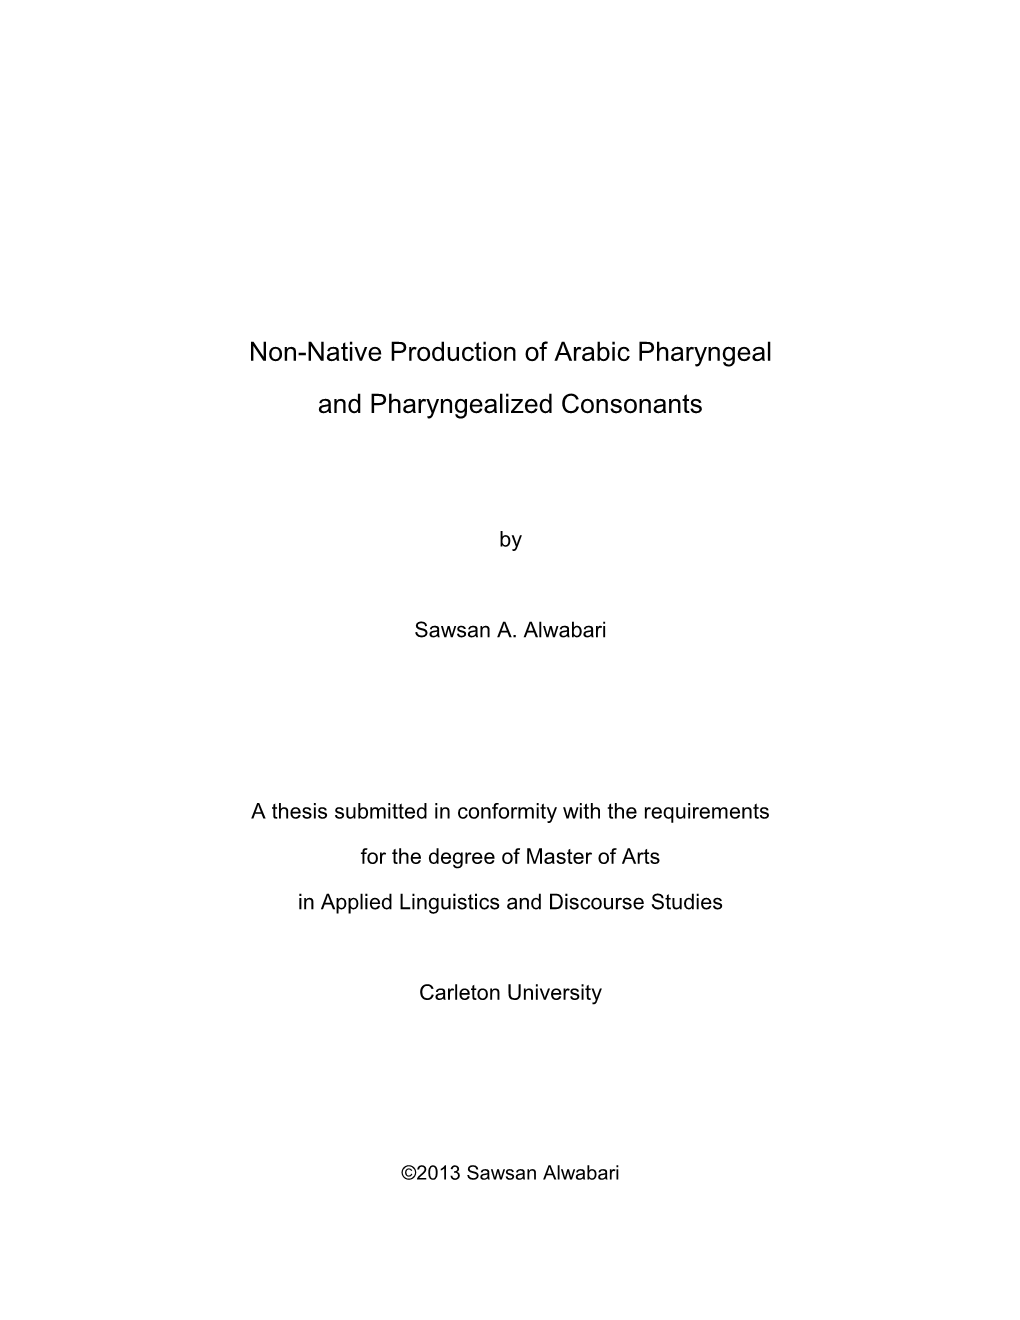 Non-Native Production of Arabic Pharyngeal and Pharyngealized Consonants